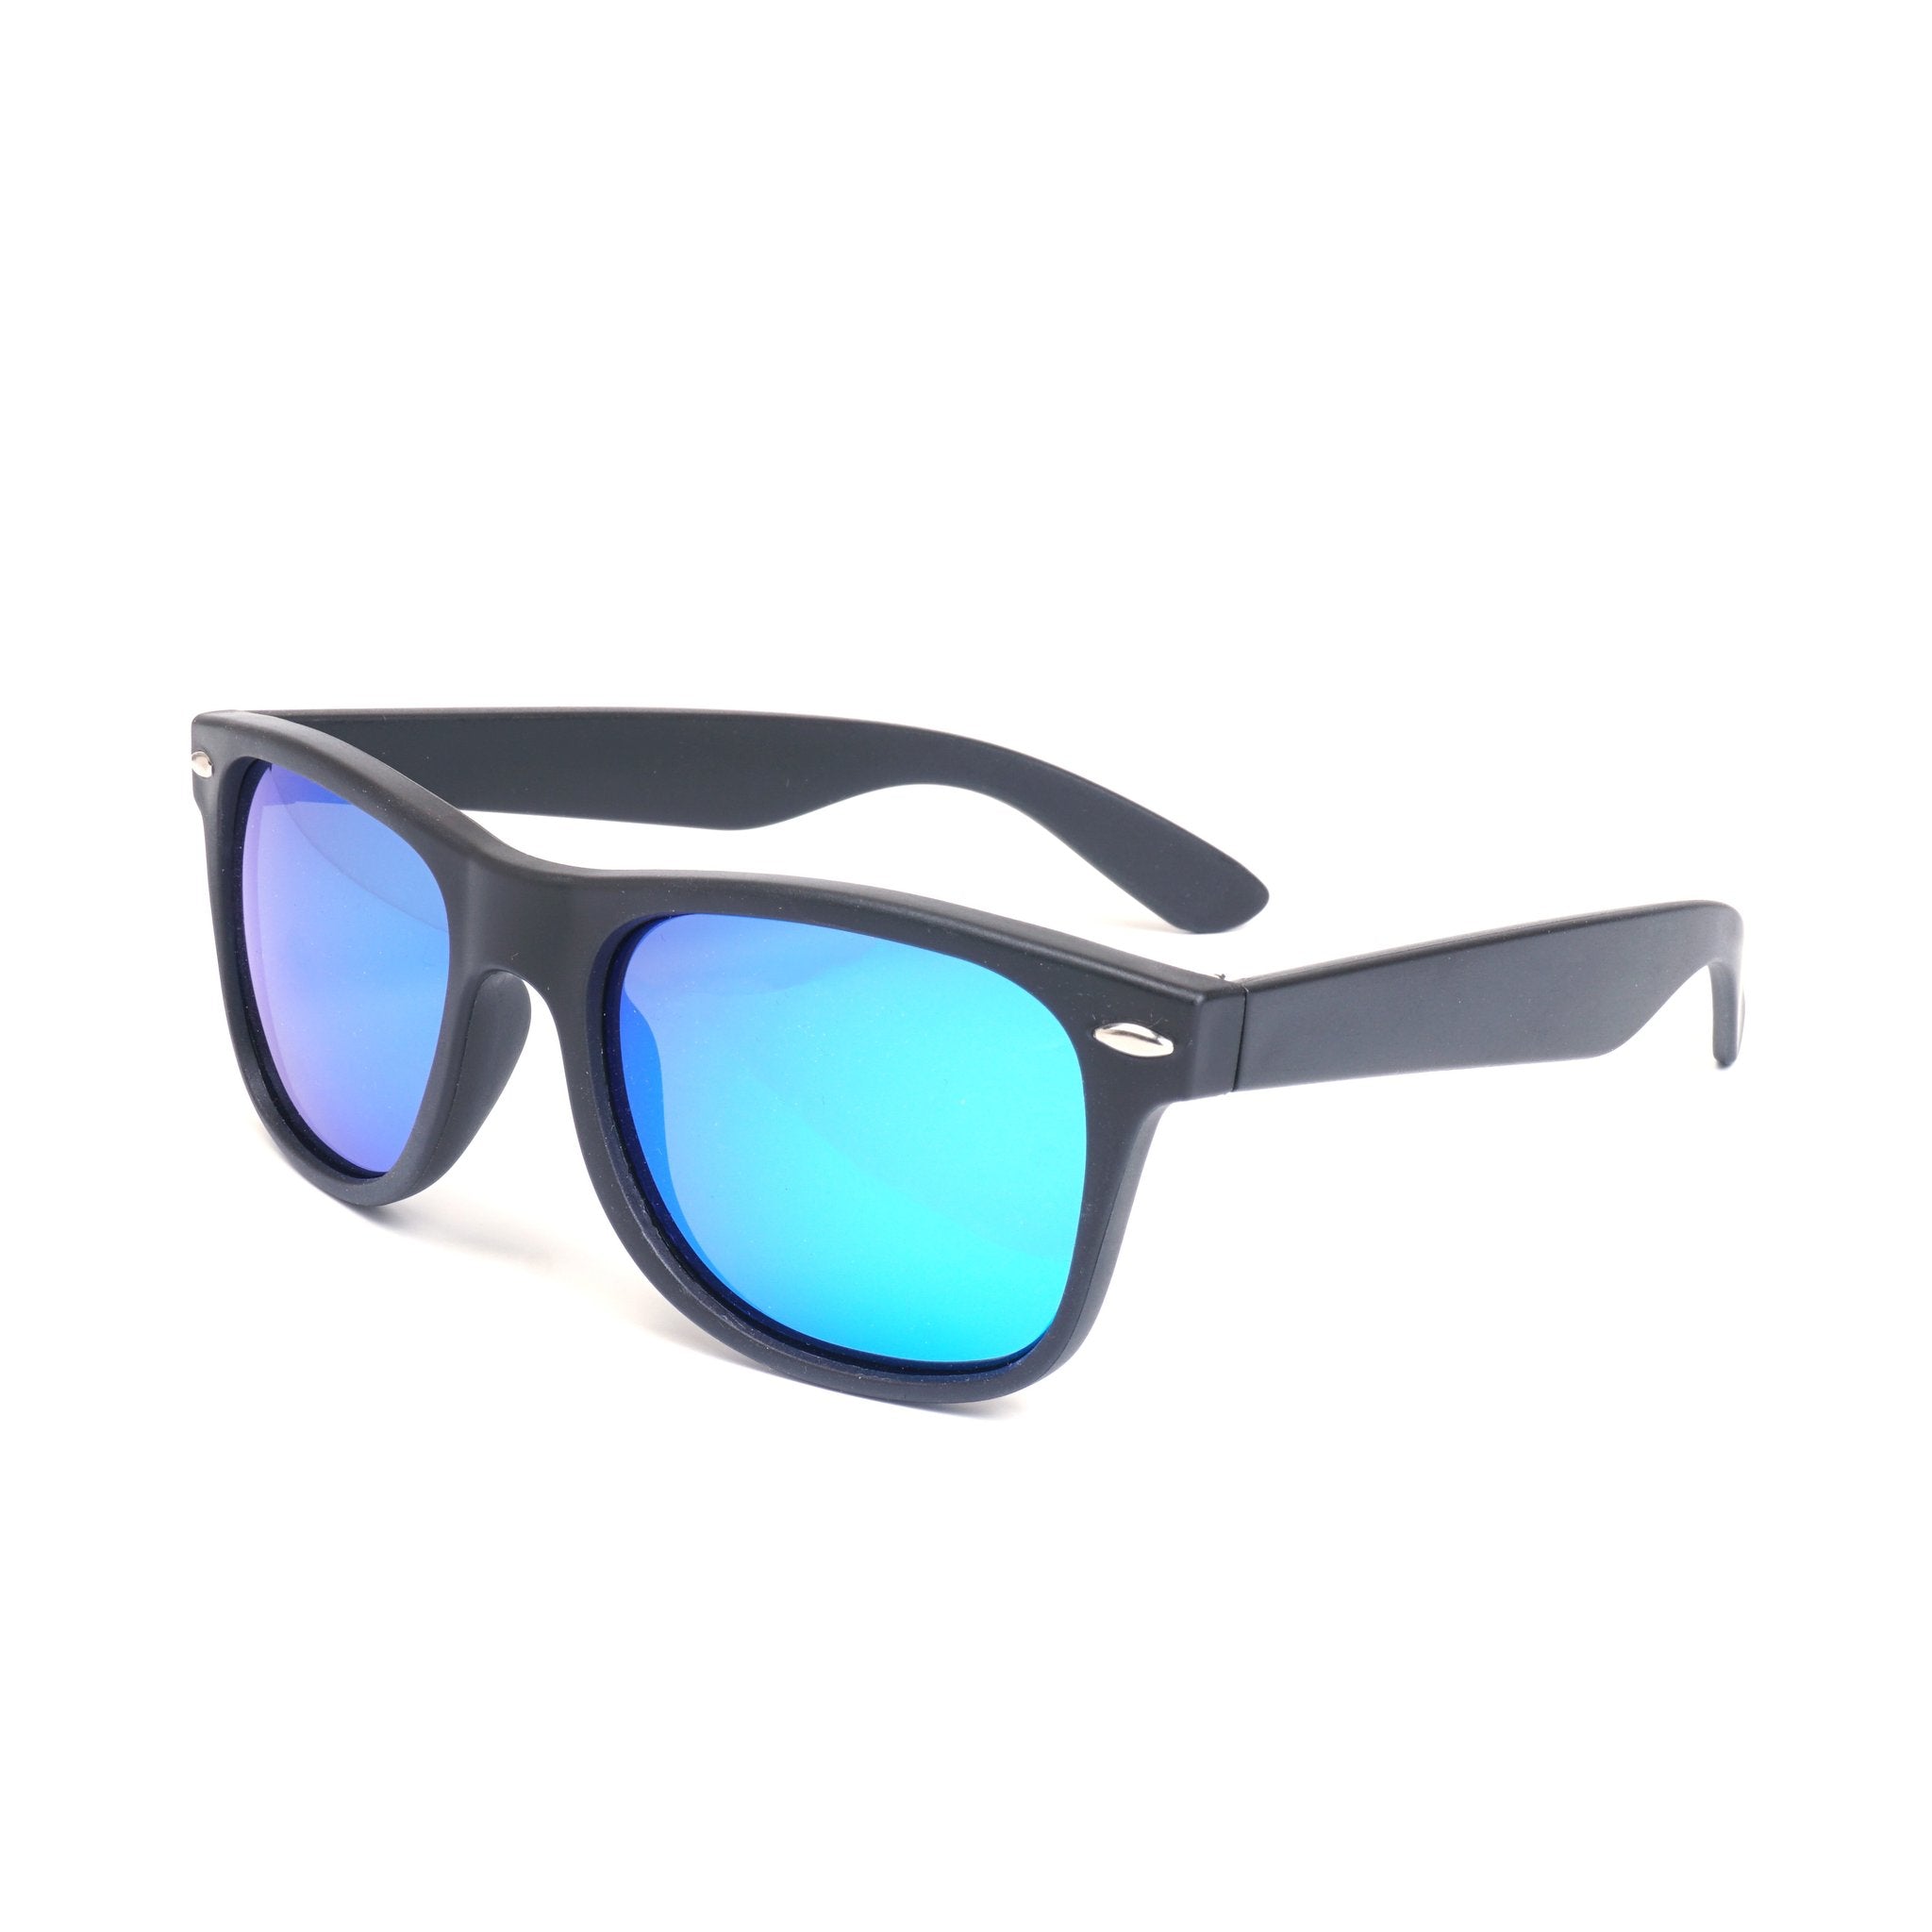 STAGE Rebel Floating Sunglasses feature classic styling, polarized lenses, and floating frames.  Ideal for fishing, boating, SUP, the beach, and other water activities. Poly-carbonate lenses with UV400 protection to filter harmful UVA and UVB Light.  Polarized Lenses reduce reflection and glare.  